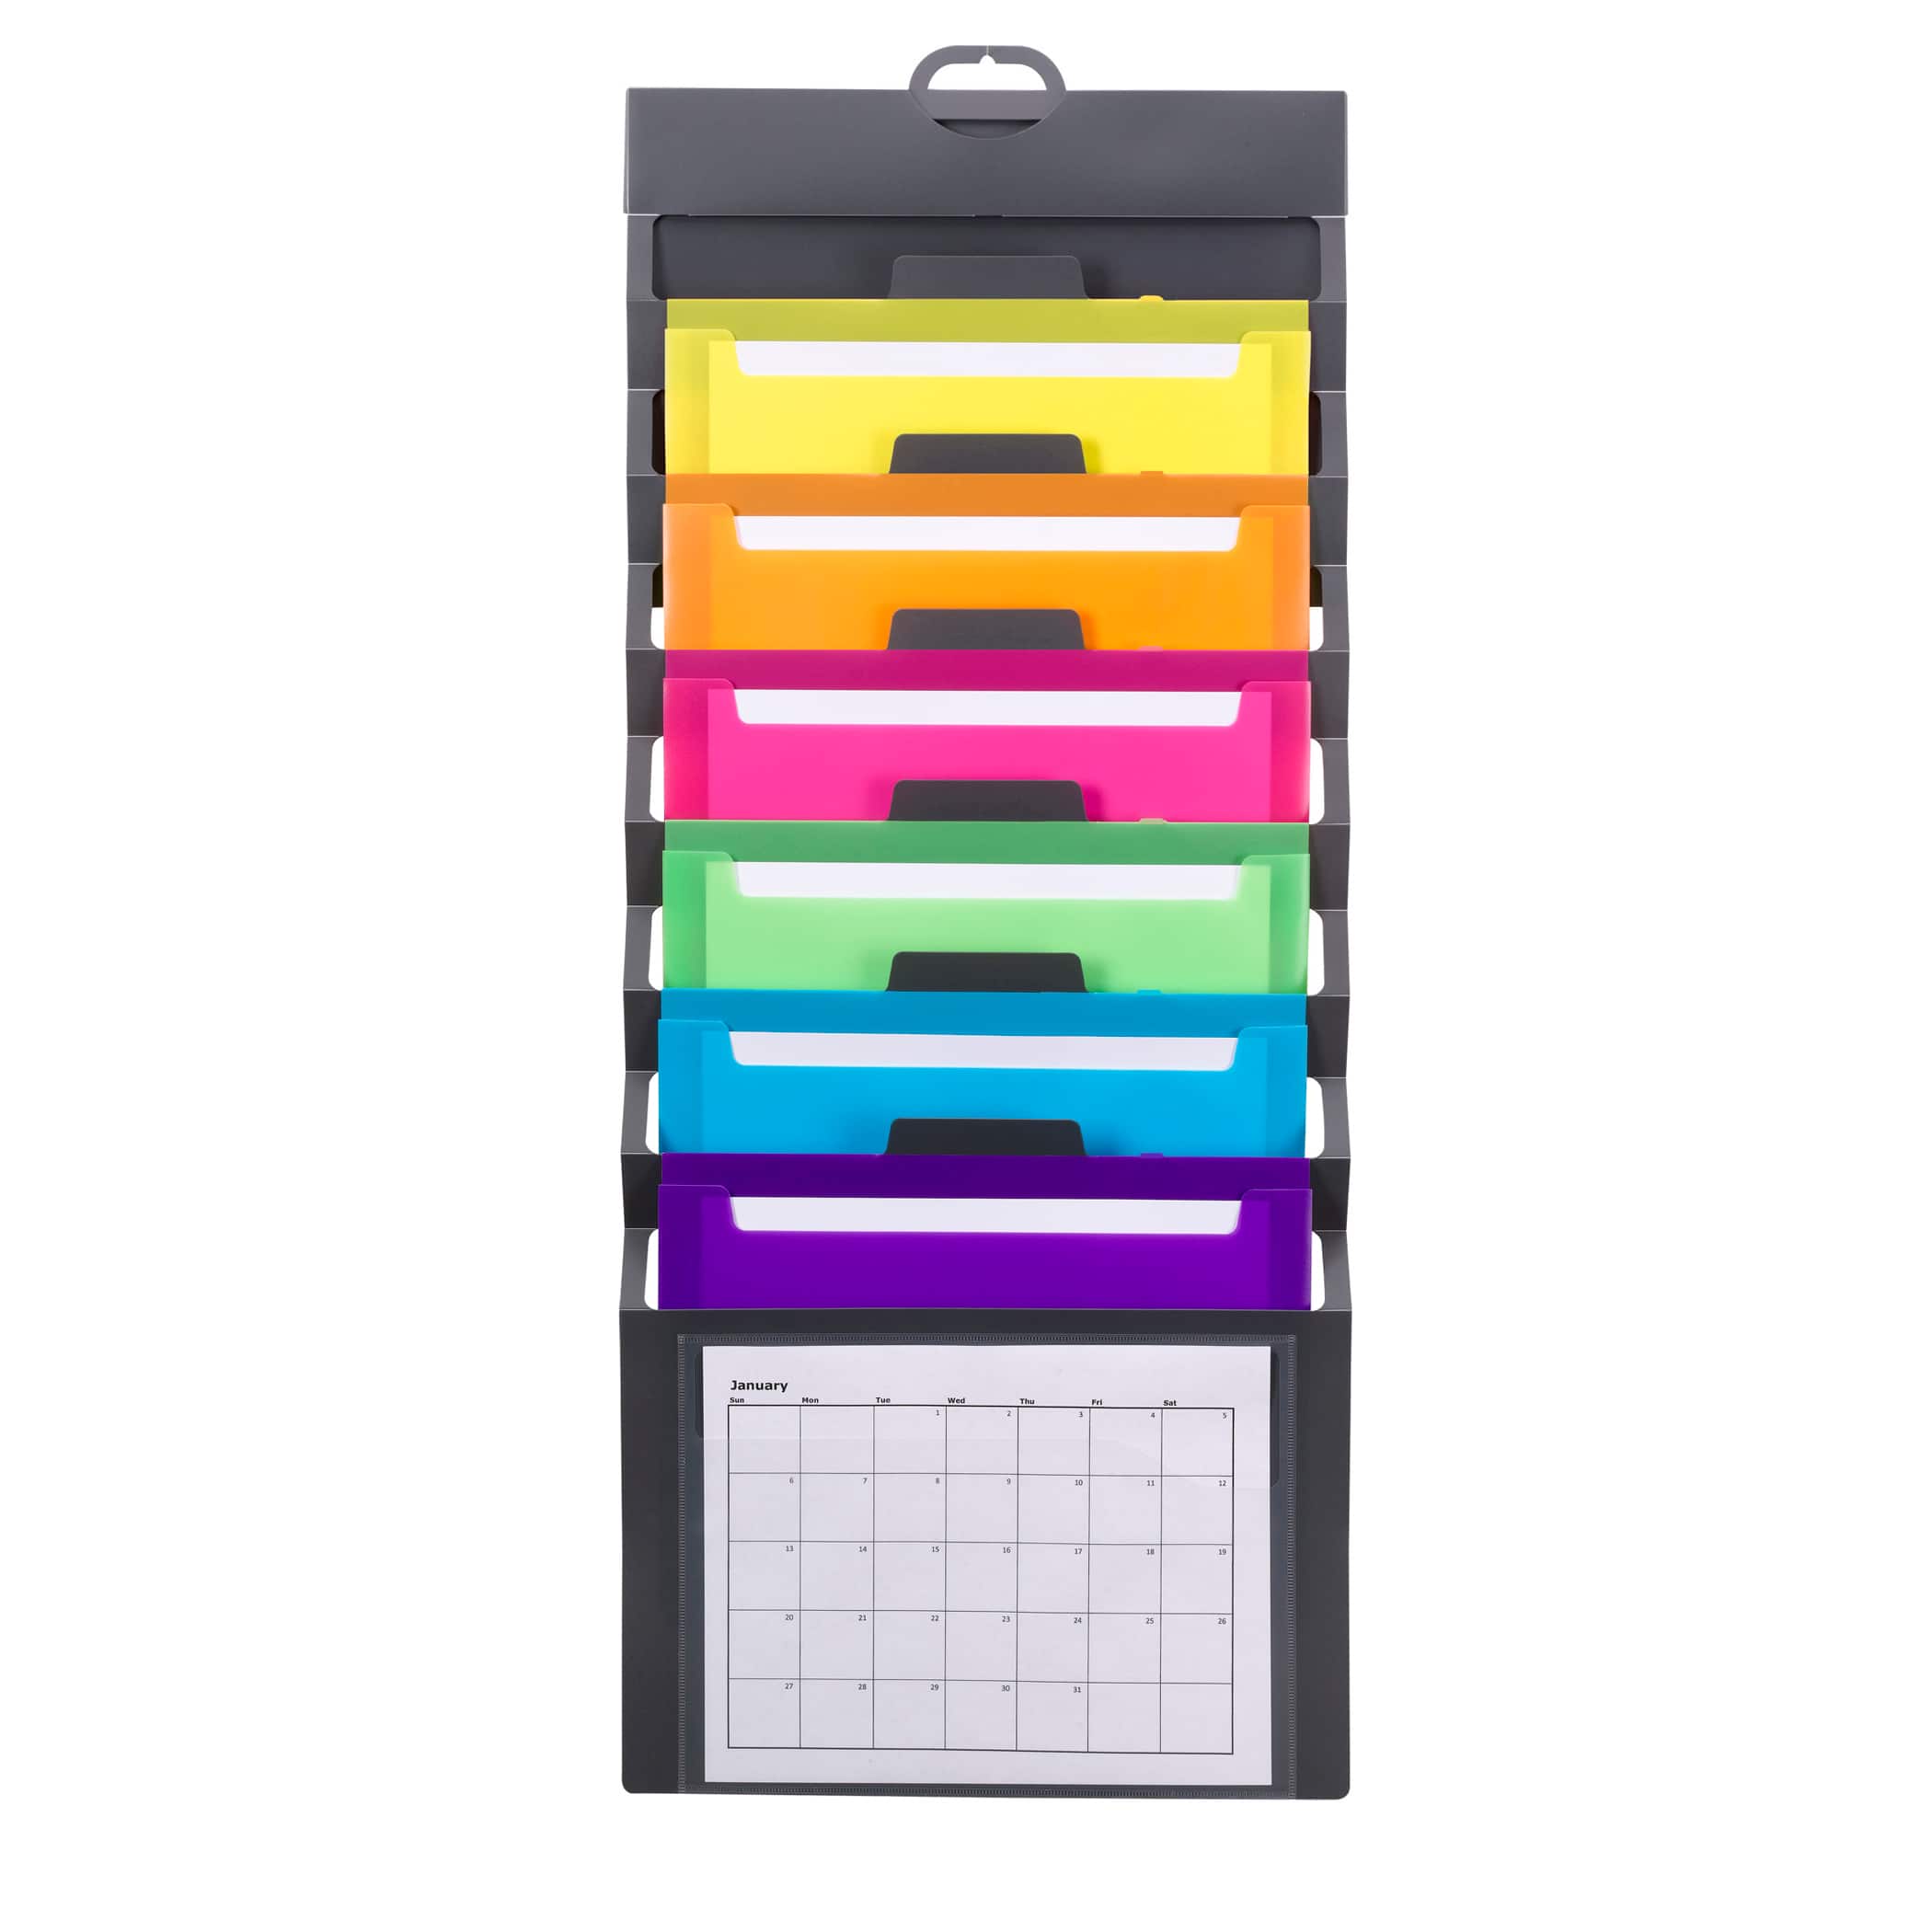 12 Pack: Smead&#xAE; Cascading Wall Organizer, Gray with 6 Bright Pockets